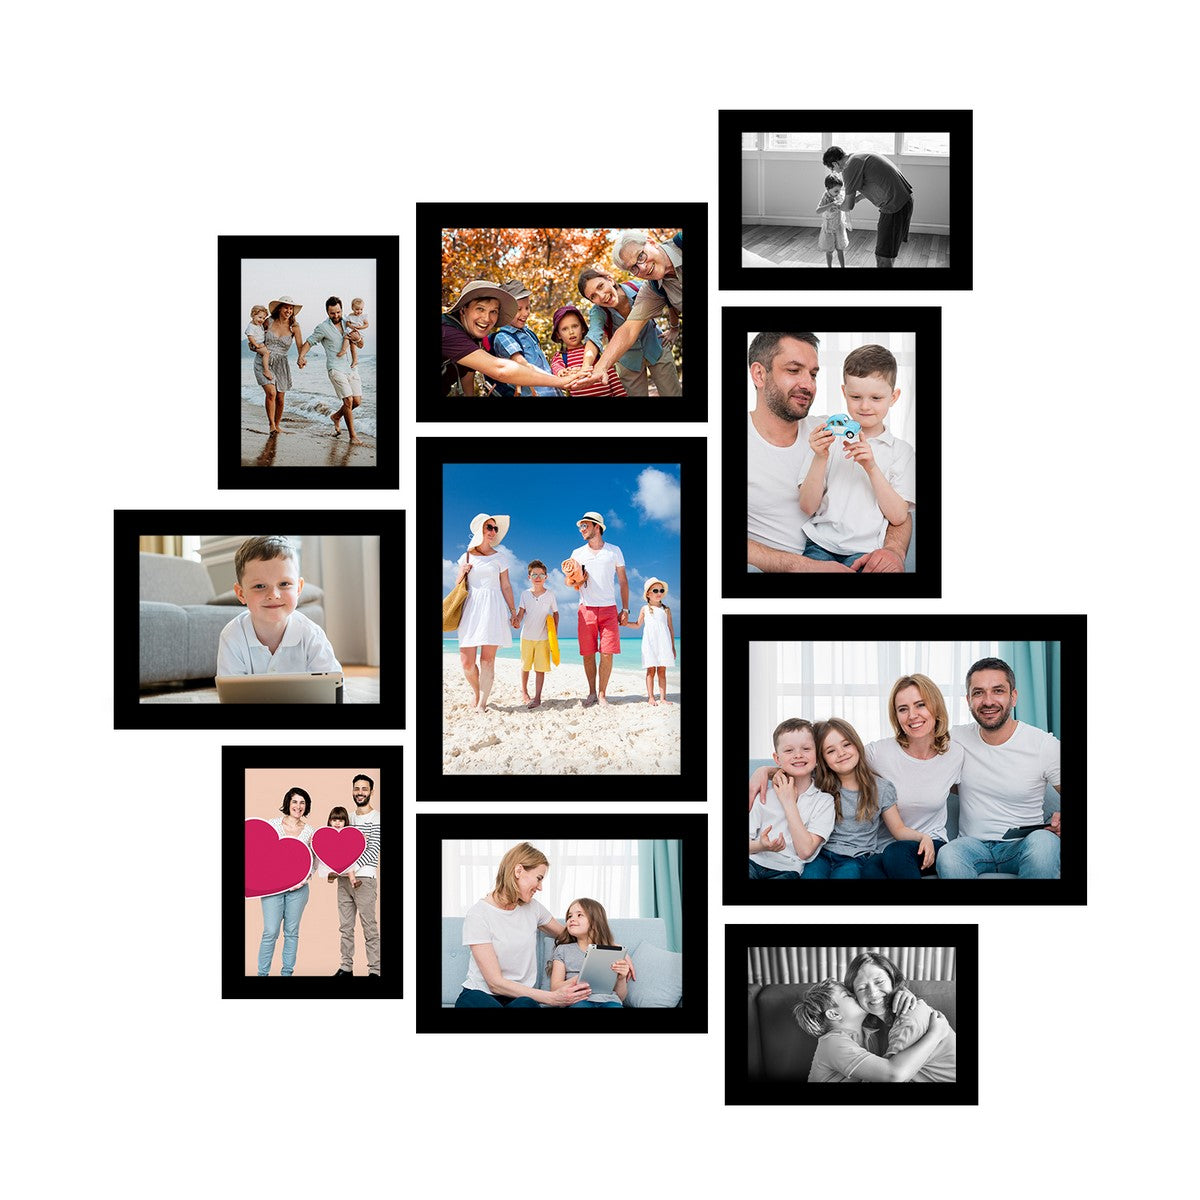 Memory Wall Collage Photo Frame - Set of 10 Photo Frames for 4 Photos of 5"x7", 4 Photos of 6"x8" and 2 Photos of 8"x10"